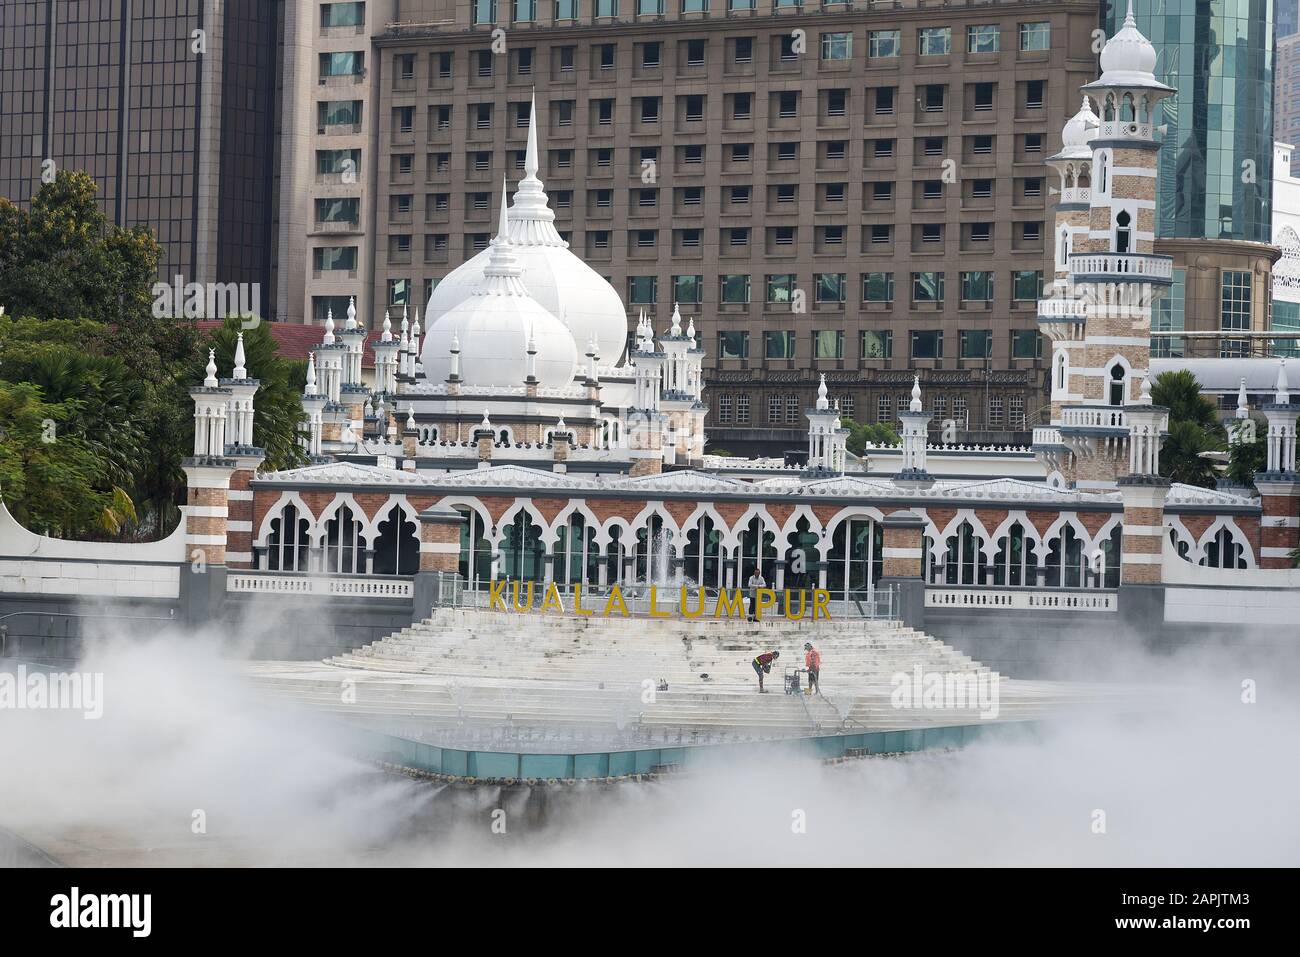 Masjid Jamek Mosque, Kuala Lumpur, Malaysia: 31 March 2019: Masjid Jamek Mosque at junction of Gombak and Klang rivers with mist effect show. Stock Photo